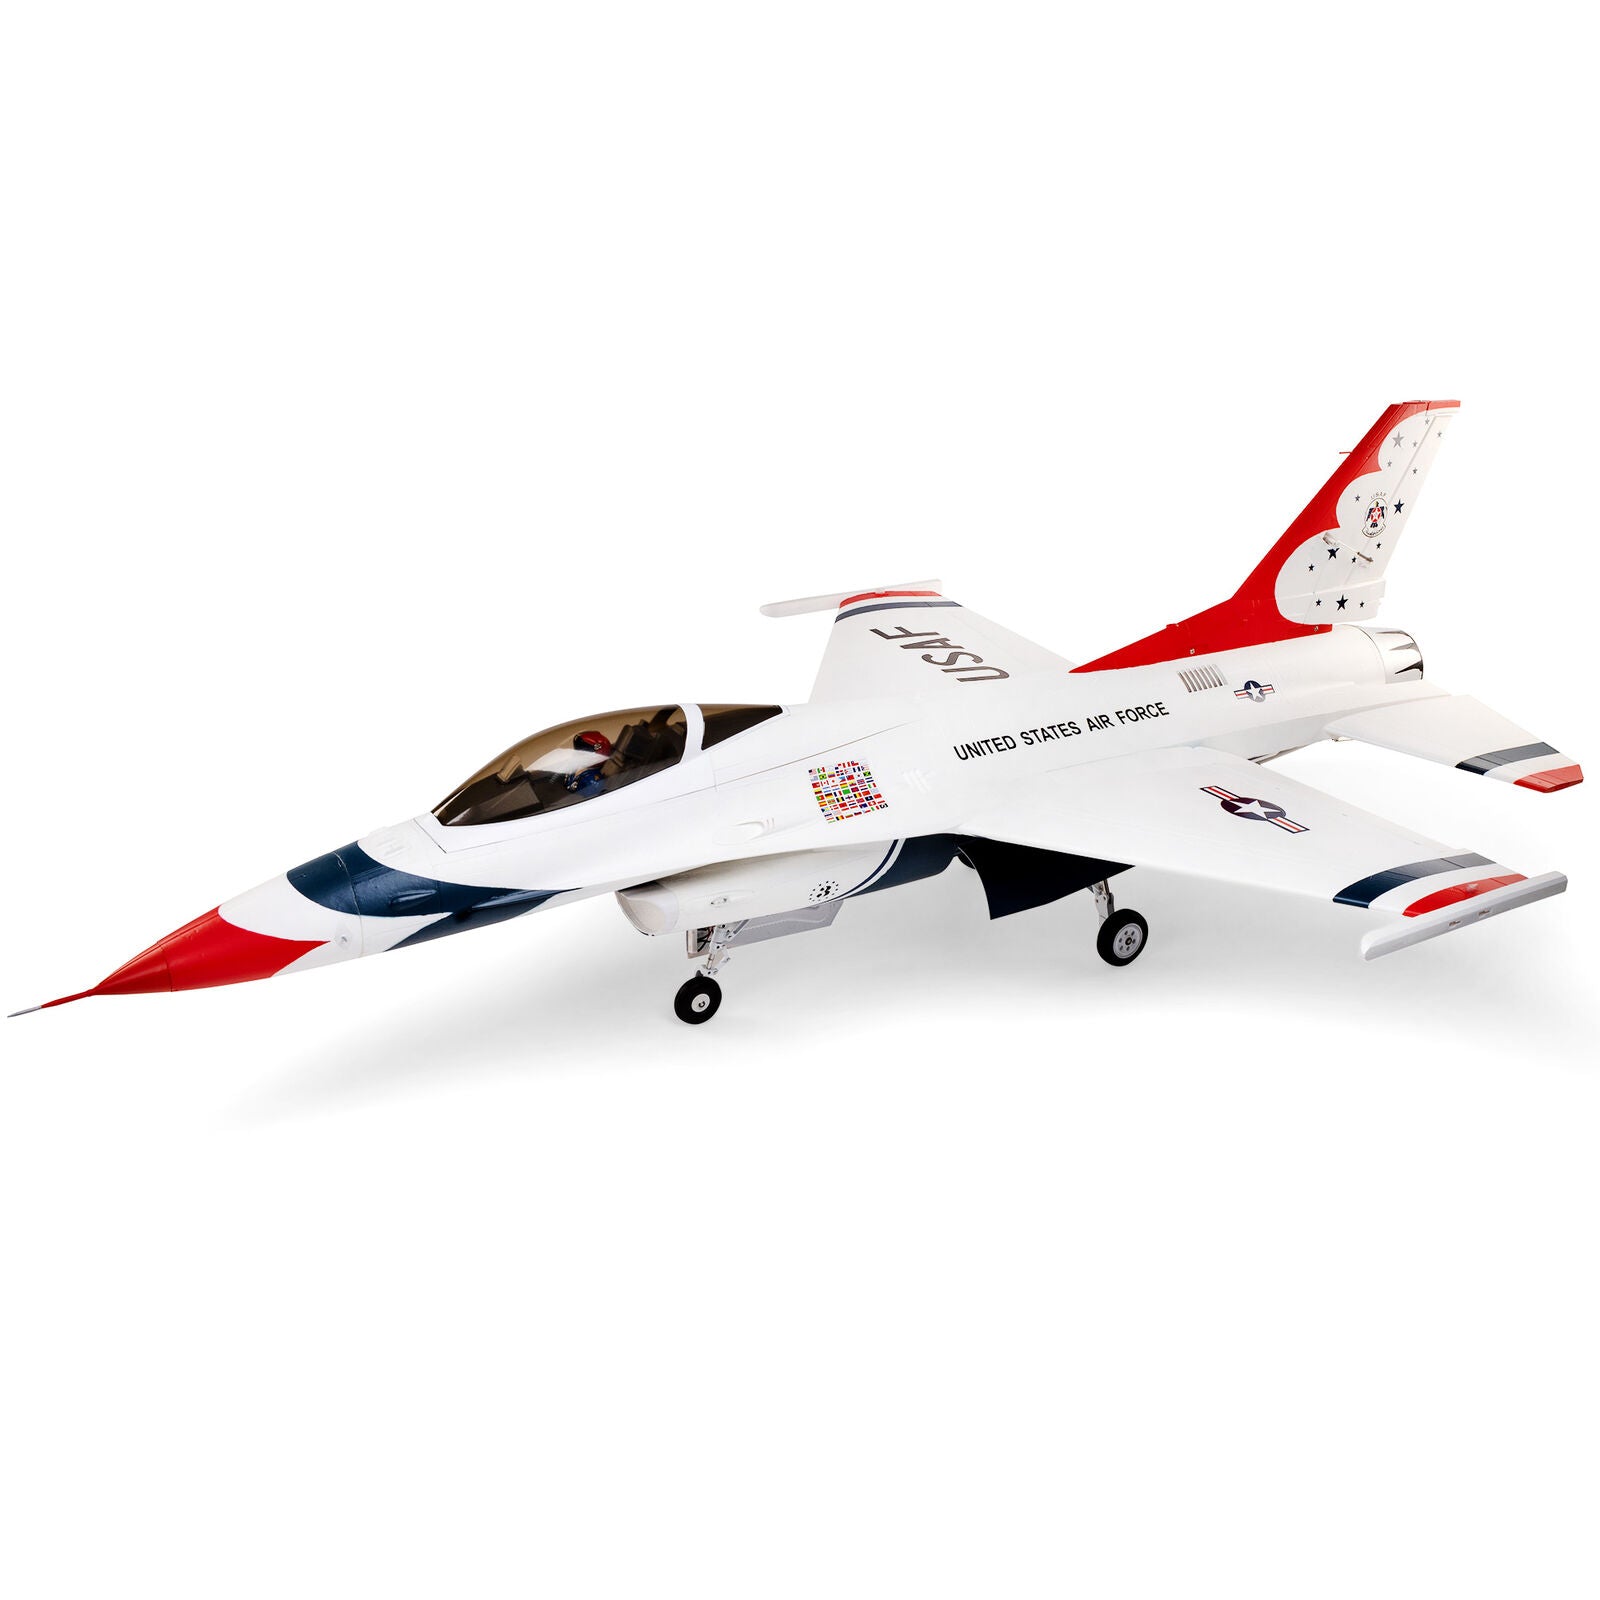 EFLITE EFL87950 F-16 Thunderbirds 80mm EDF BNF Basic with AS3X and SAFE Select